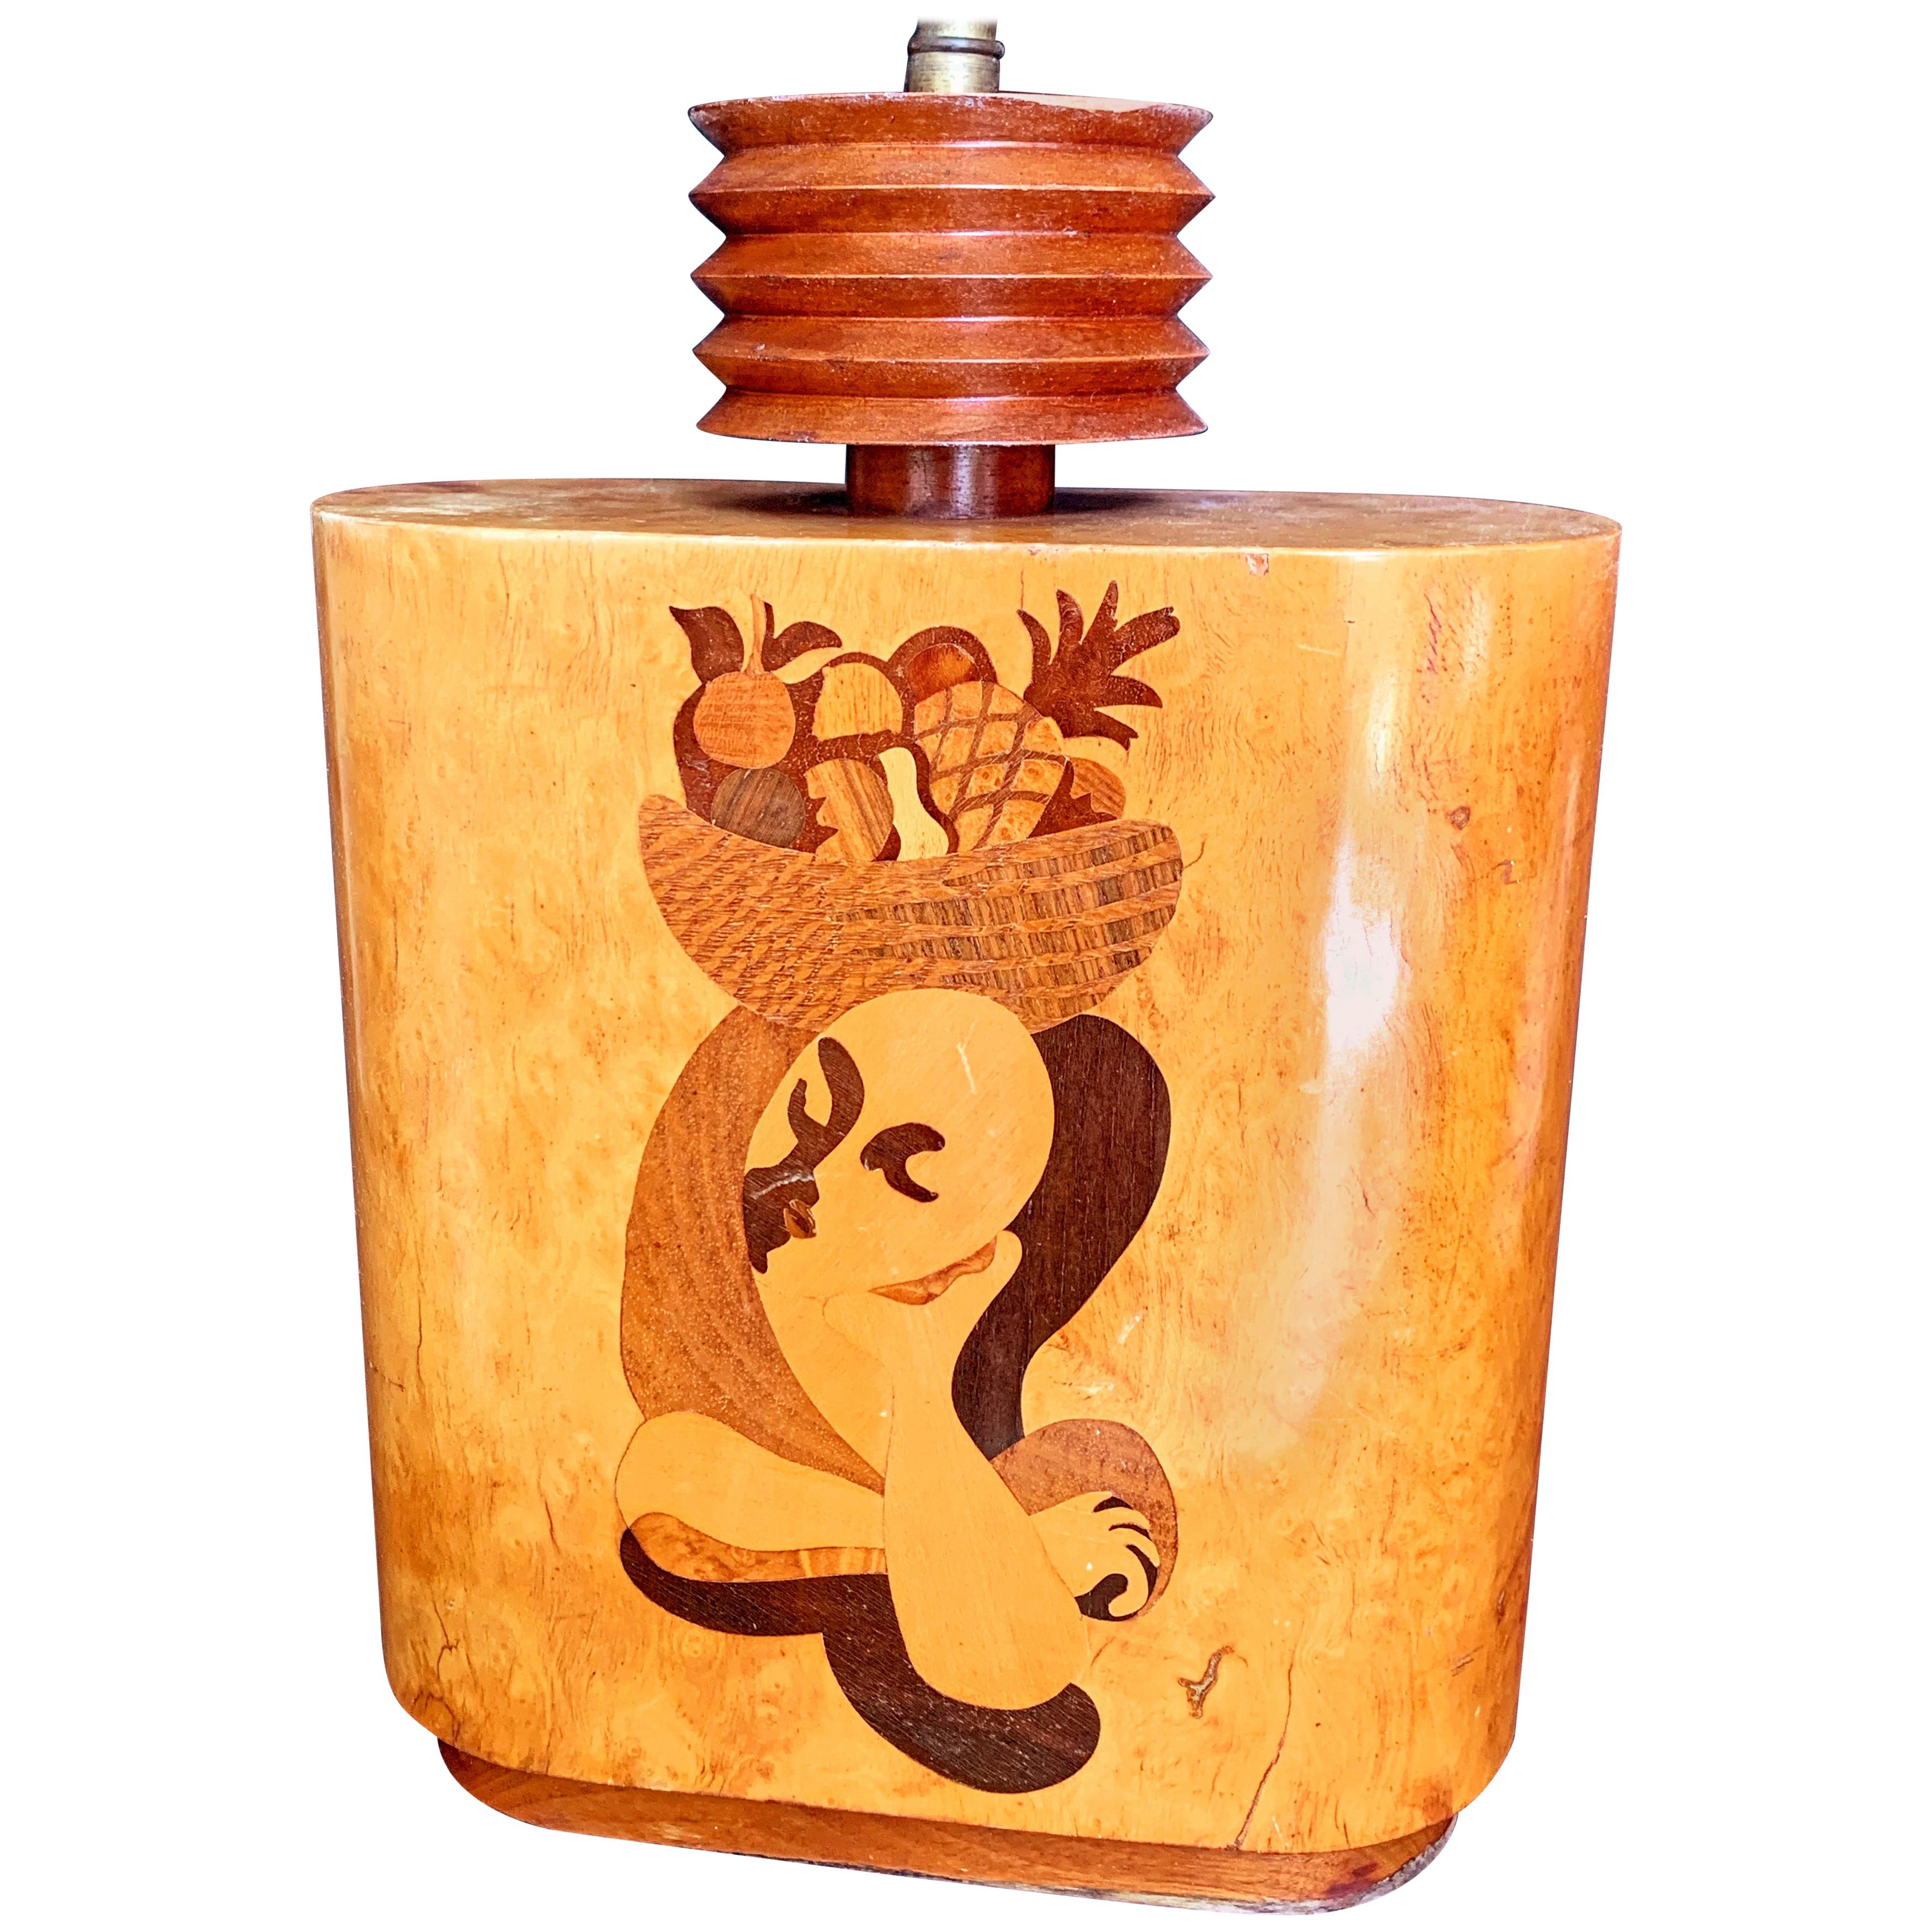 "Carmen Miranda, " Unique Art Deco Table Lamp with Inlaid Wood by Szoeke For Sale